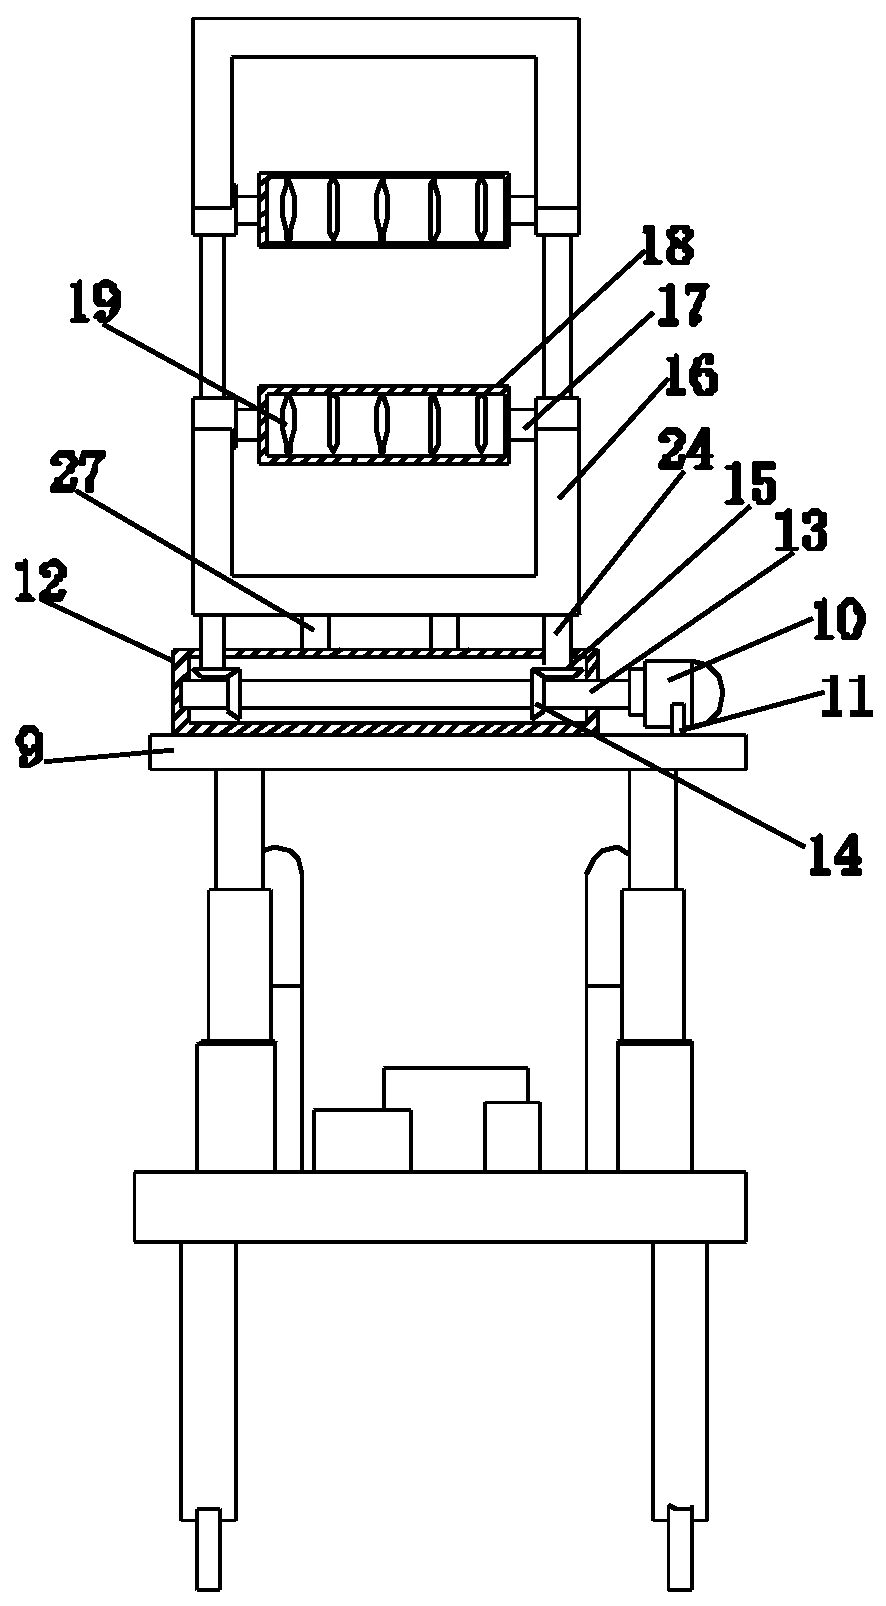 Deicing device for power transmission line